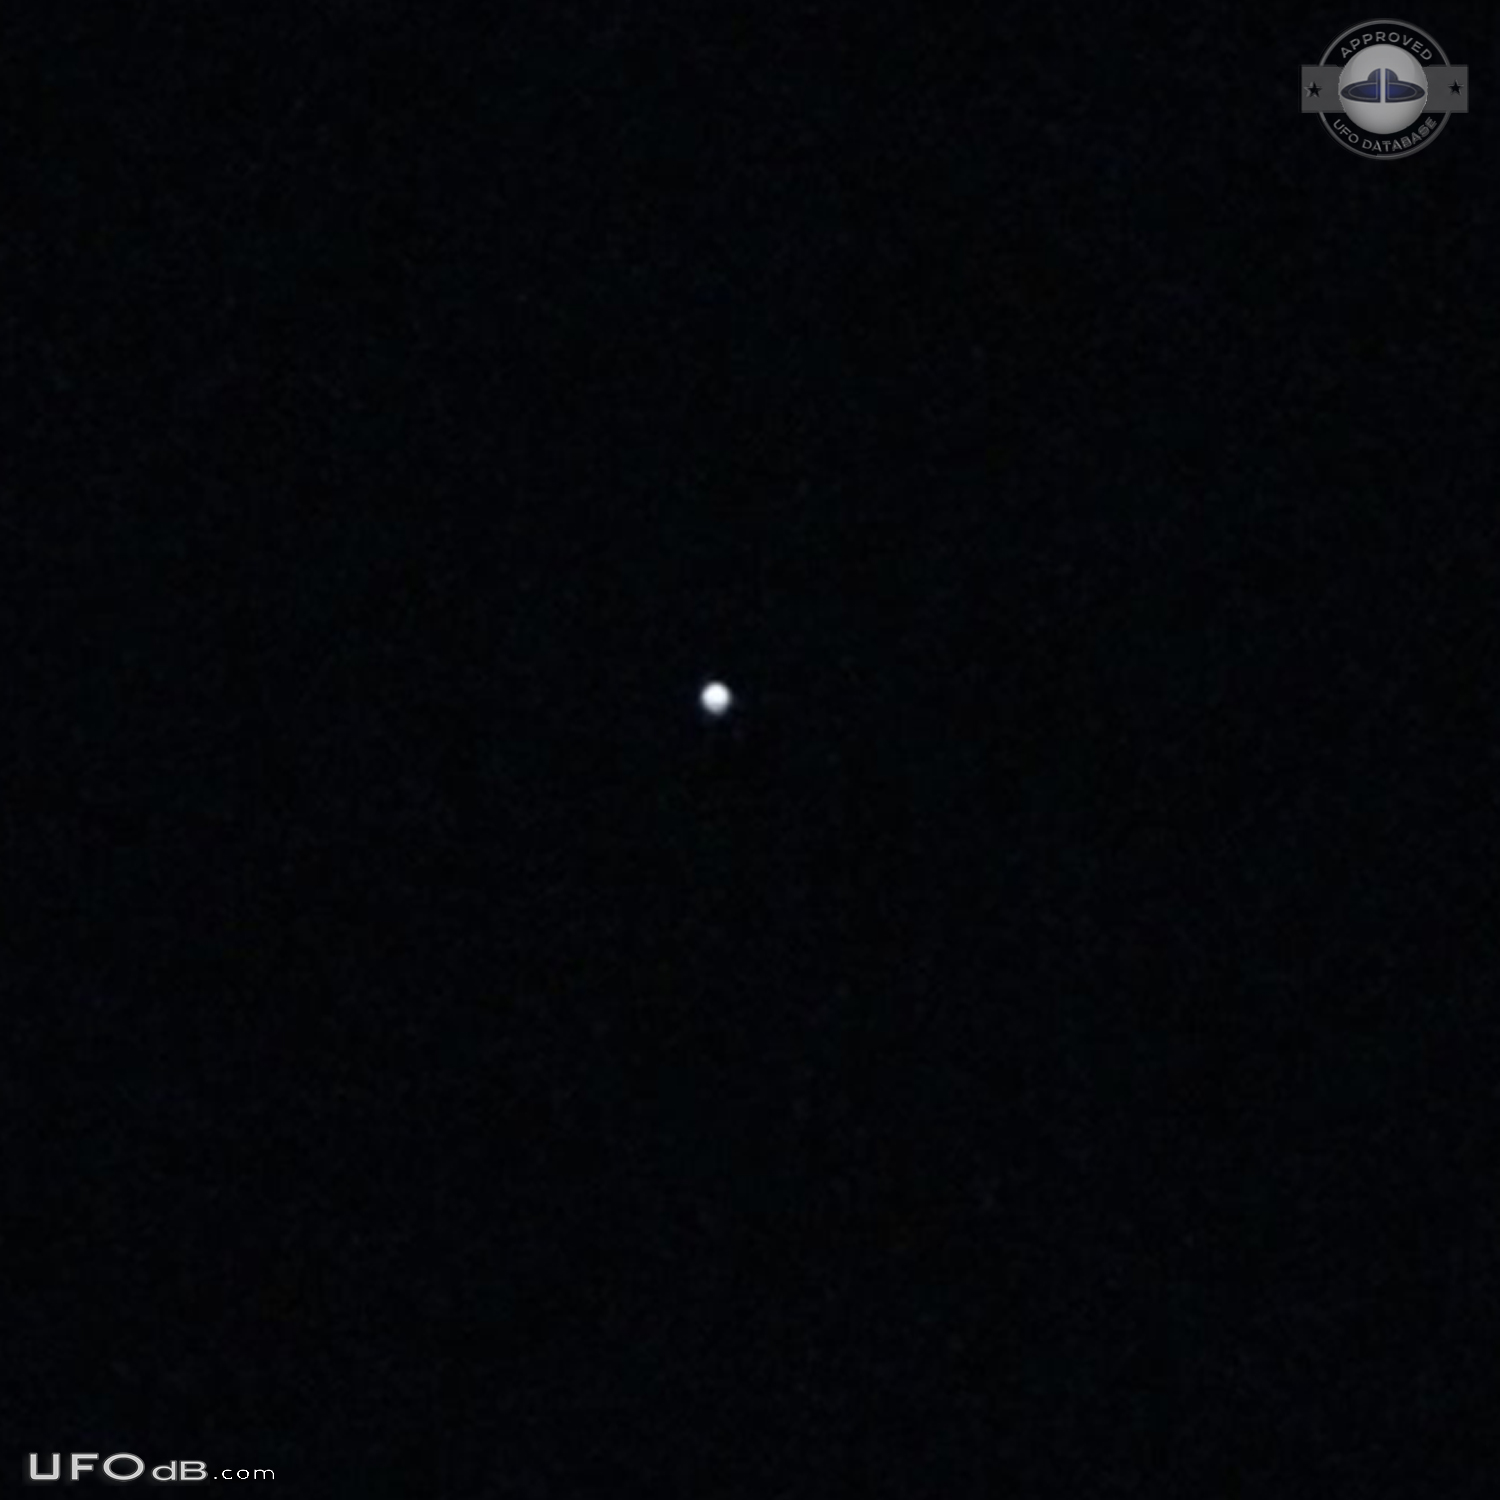 Was curious , below a star seemed there was a UFO Toronto Ontario Cana UFO Picture #784-3